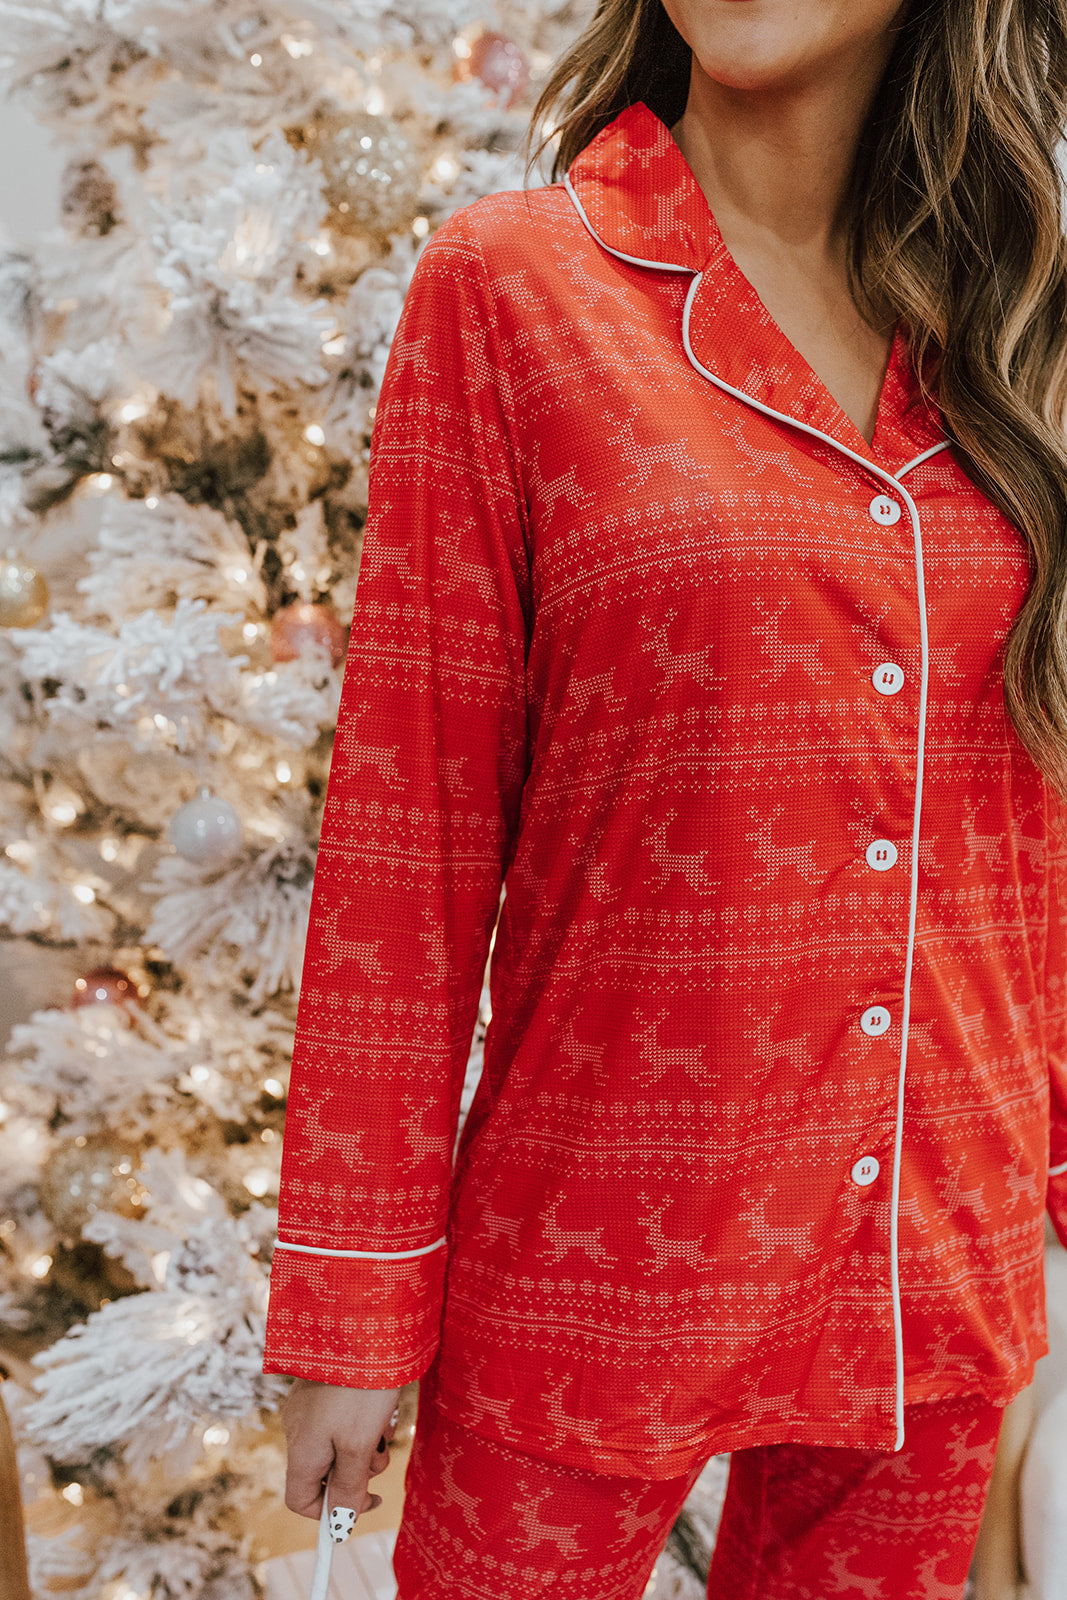 THE PINK DESERT HOLIDAY REINDEER PAJAMAS IN RED